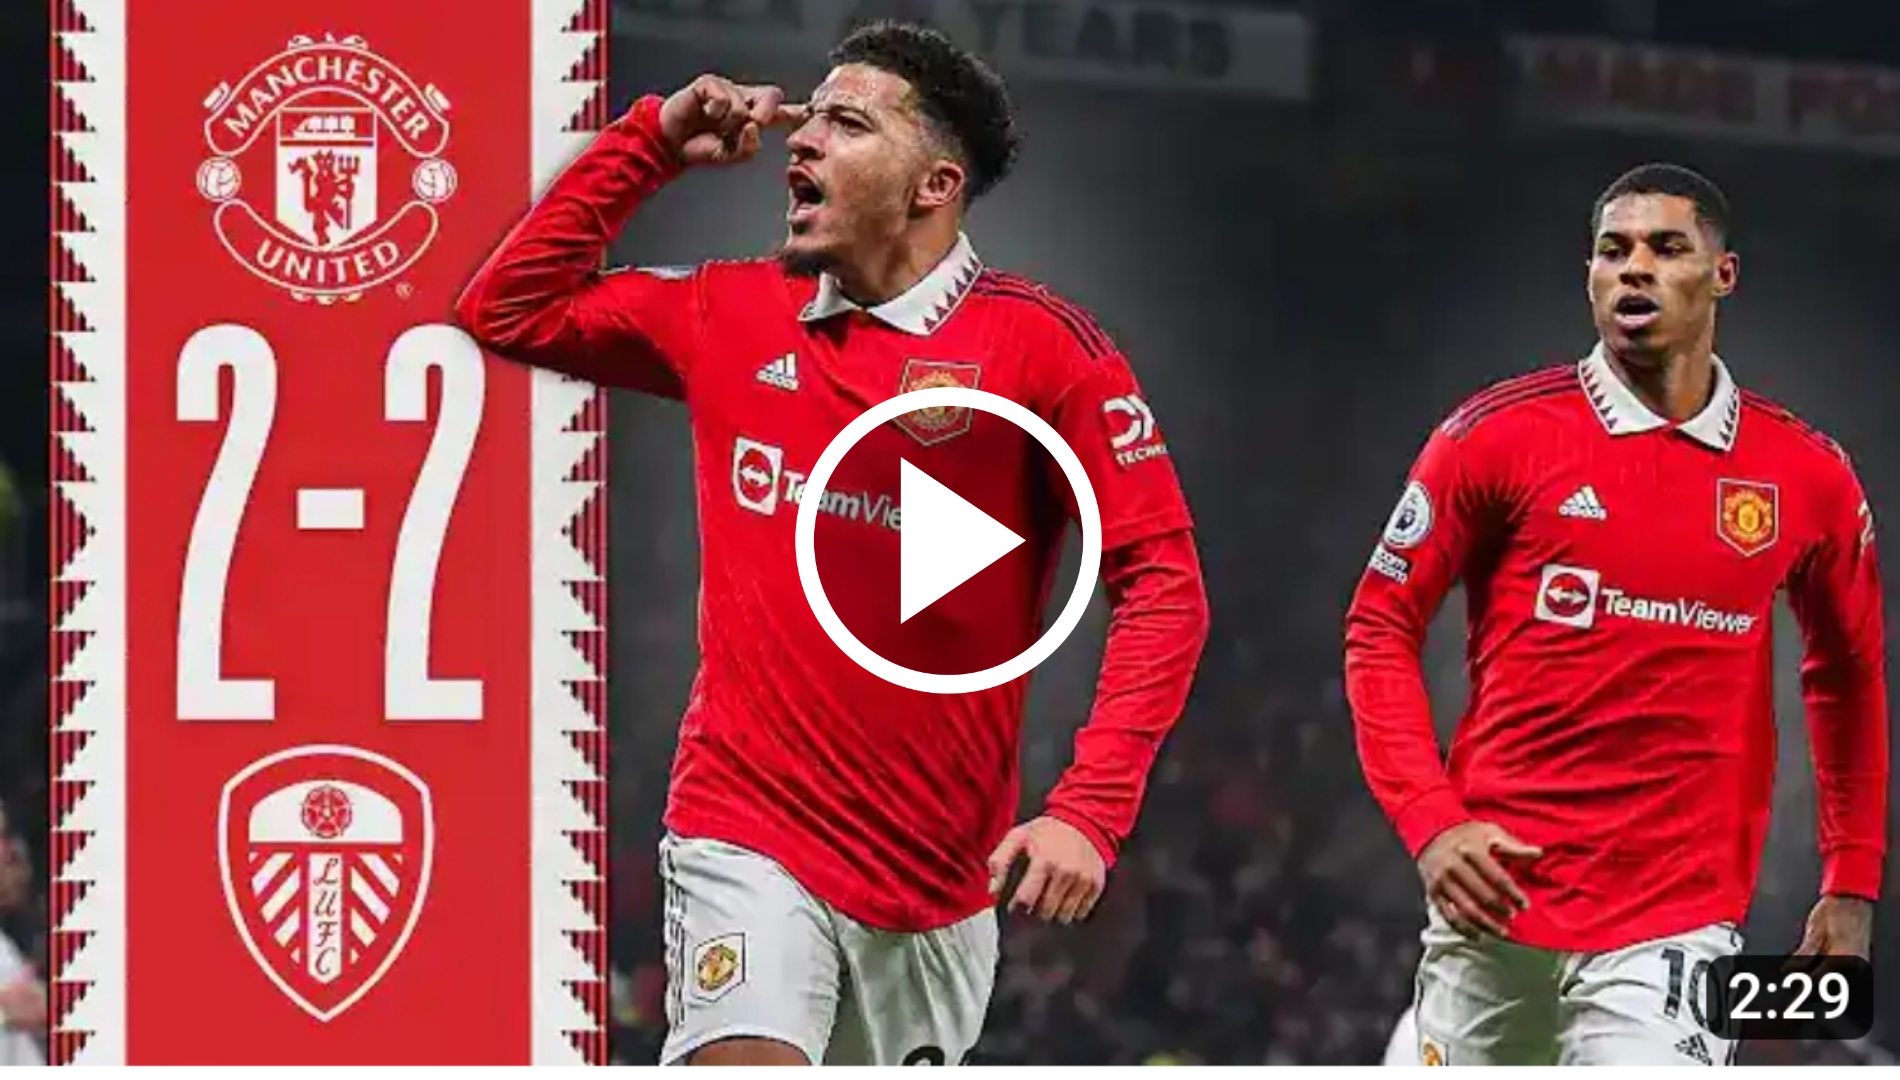 Highlights: Watch Man United vs Leeds united (2-2) extended highlights and goals 8 Sportelo